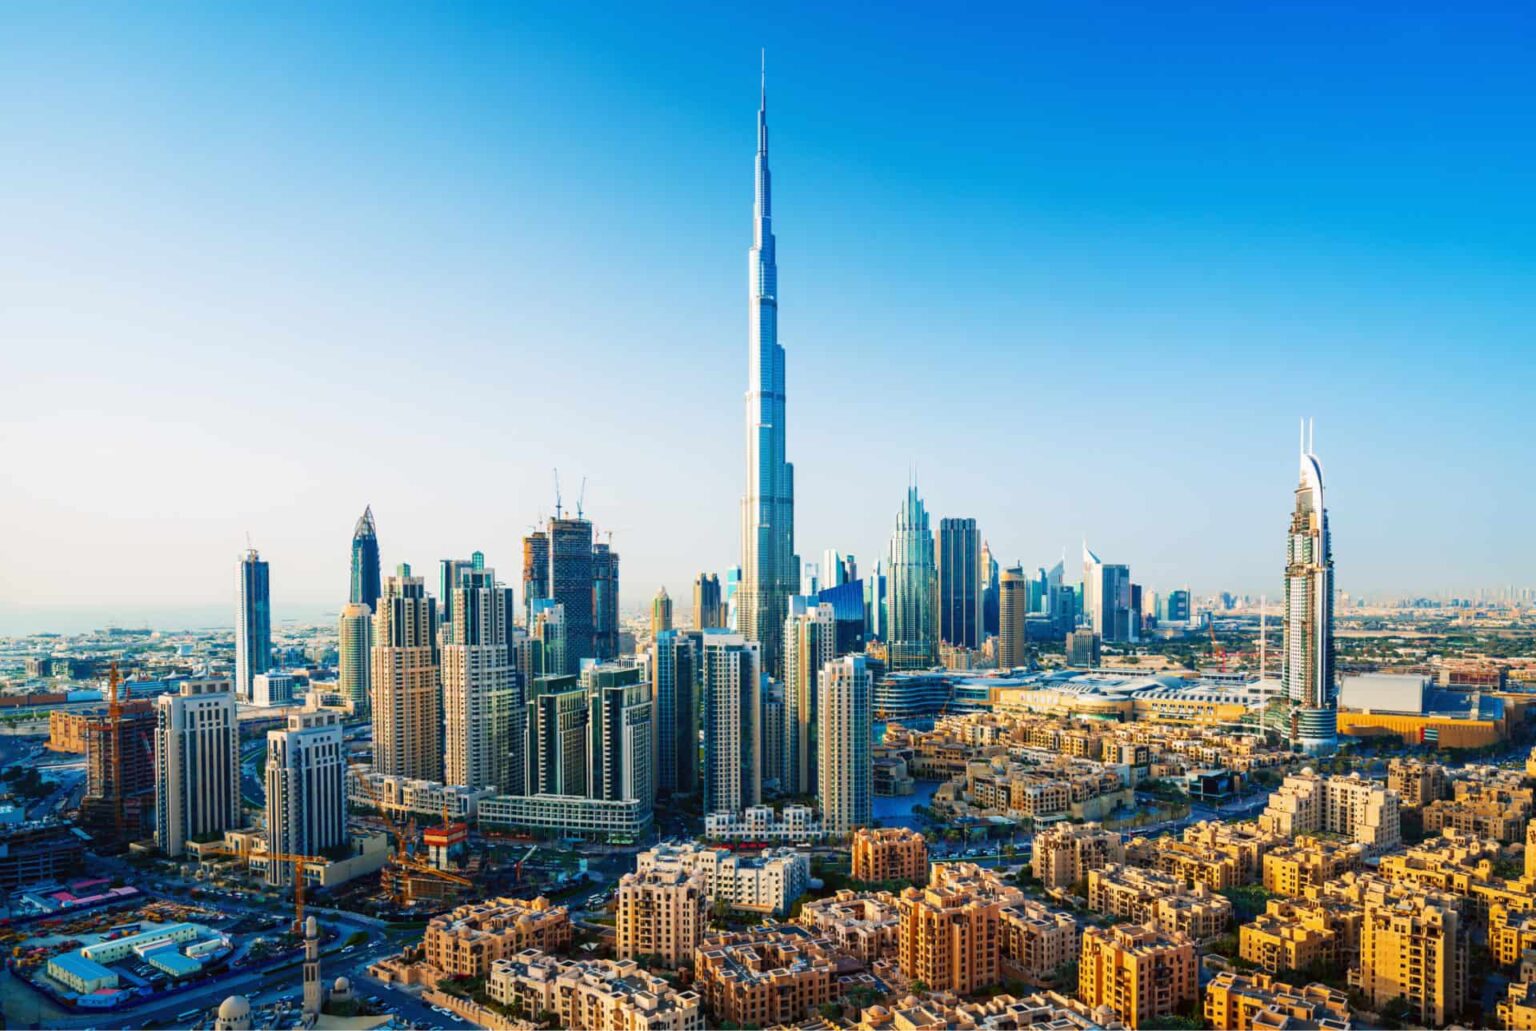 UAE looks to new reforms to boost economy and global image